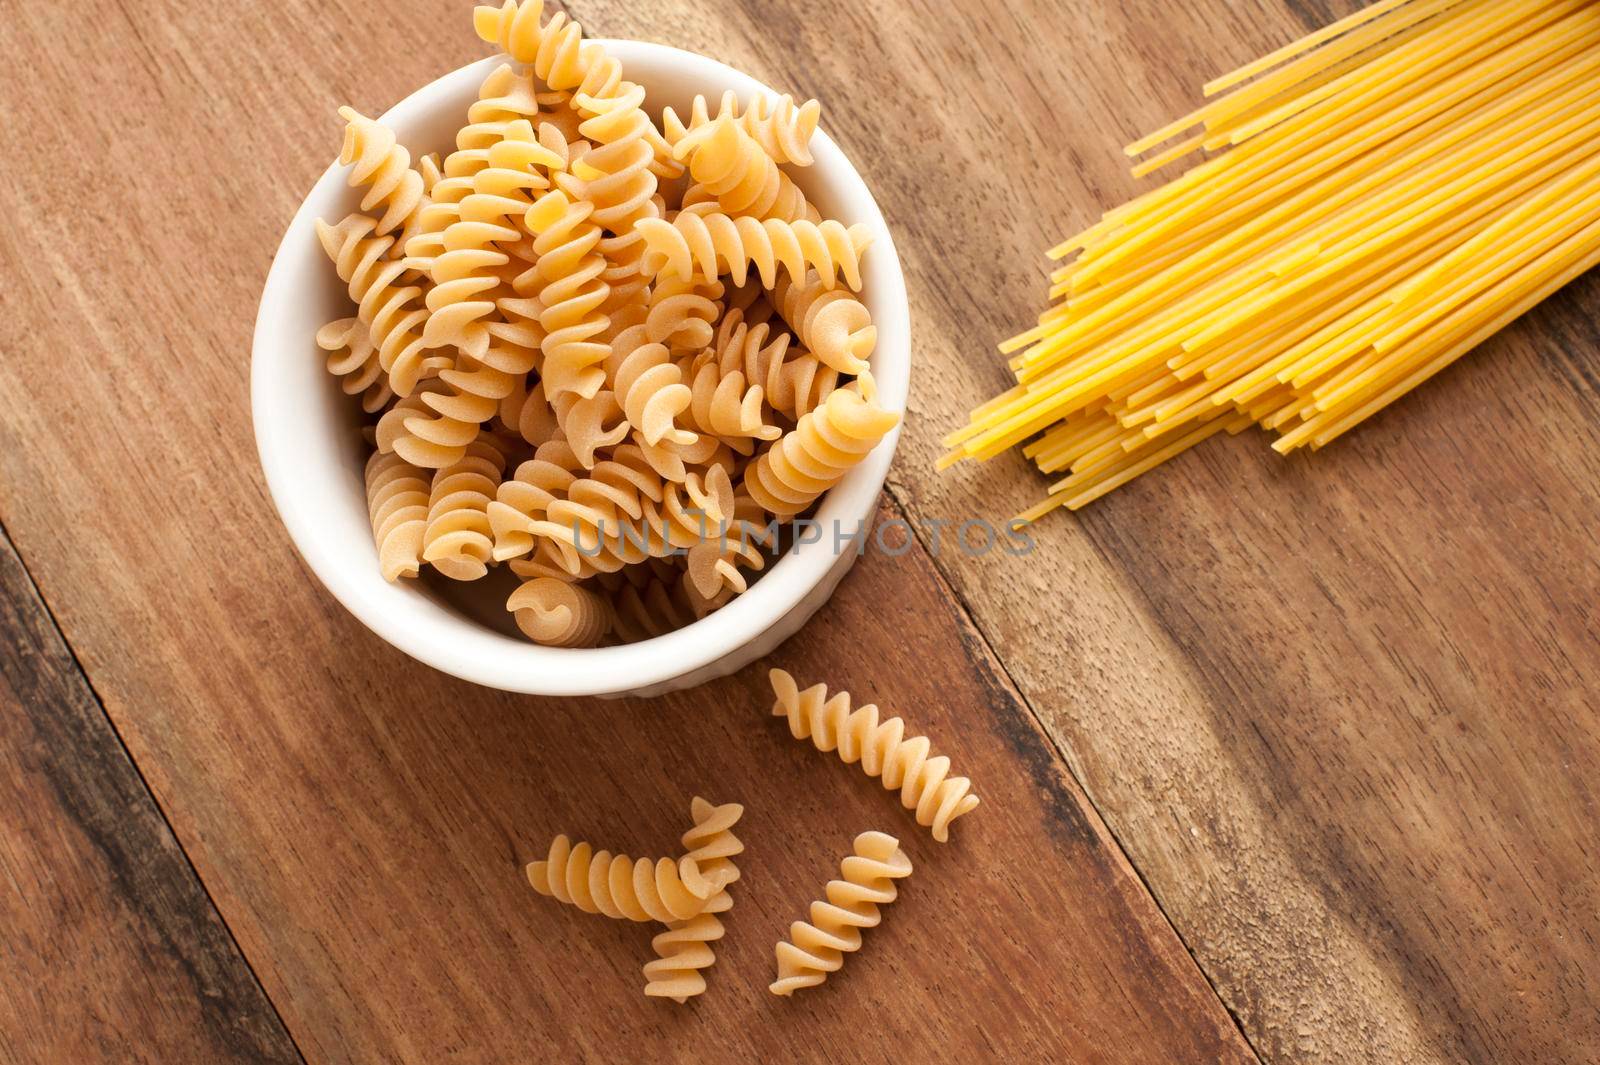 Dried Italian spiral fusilli and spaghetti pasta on a wooden kitchen table ready to be used as cooking ingredients in a Mediterranean recipe